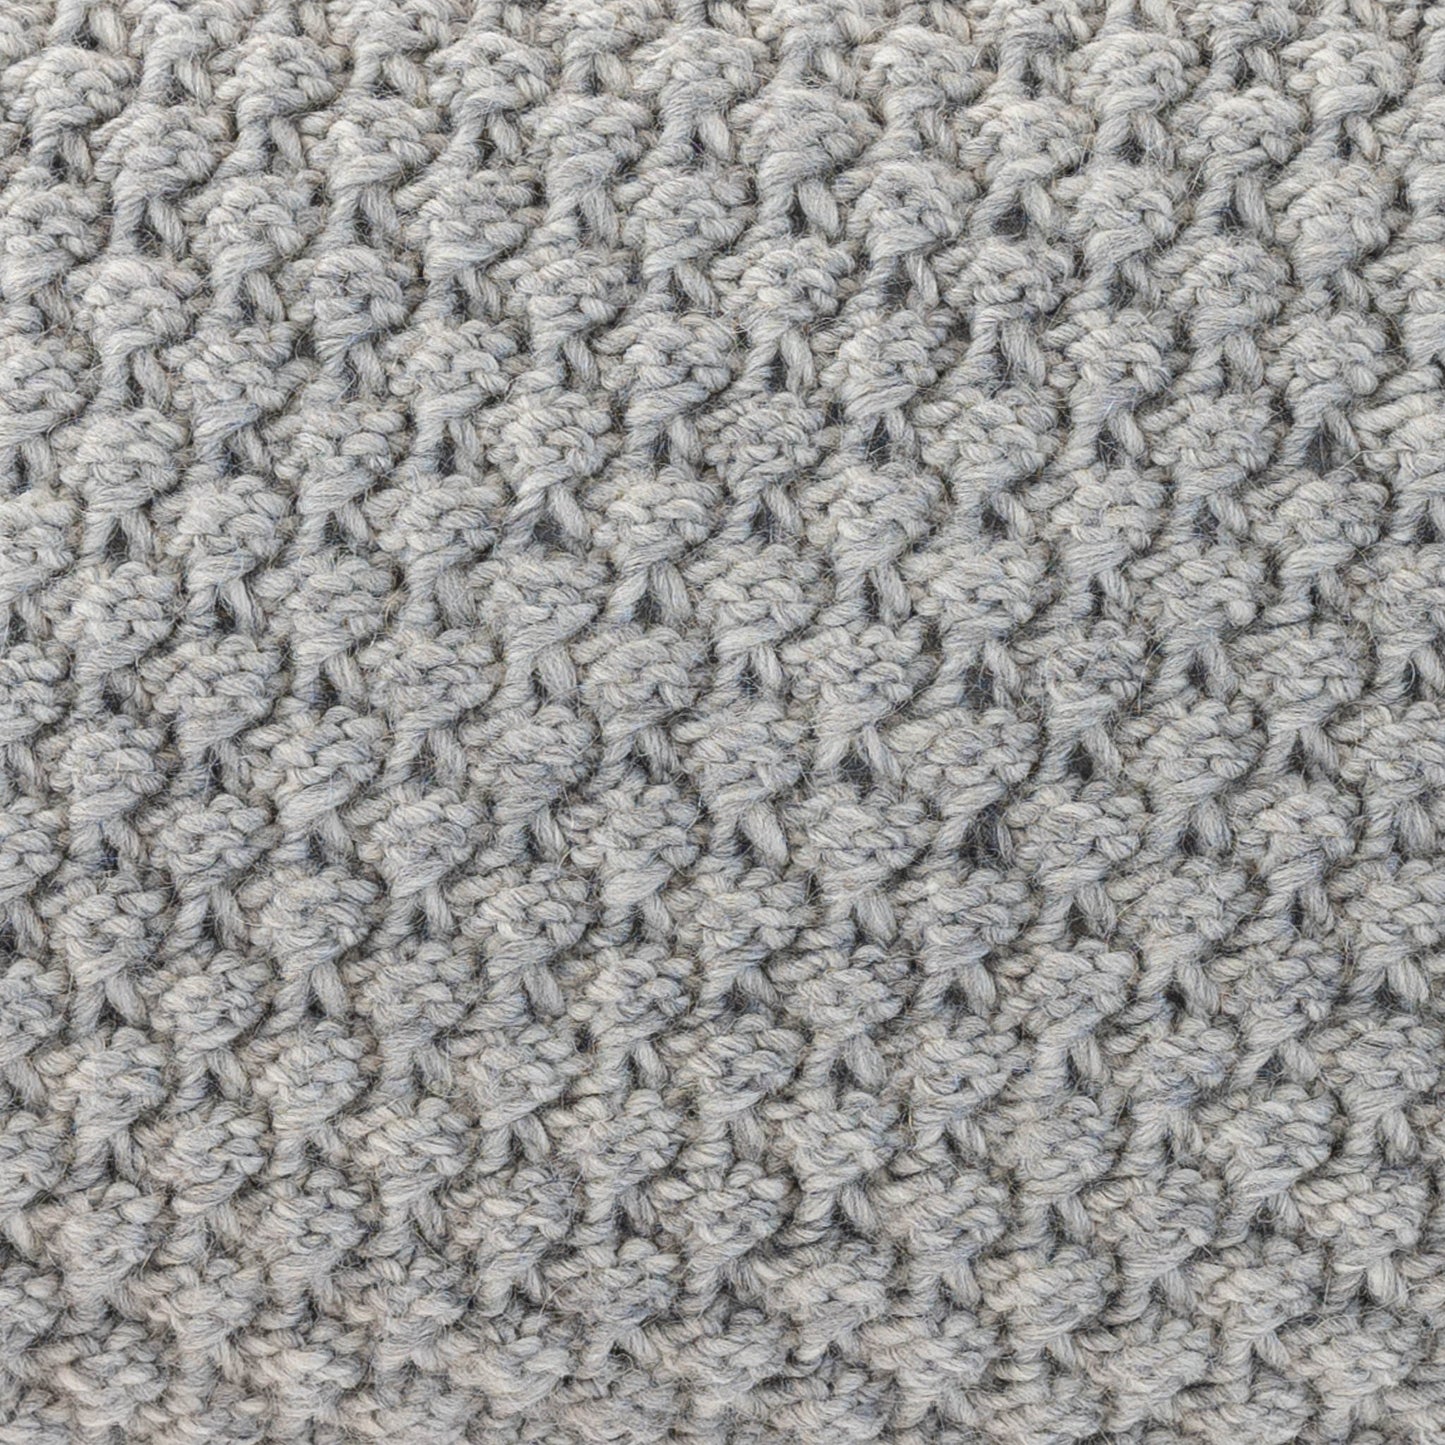 Knitted Wool Throw Pillow Cover | Light Grey Heather